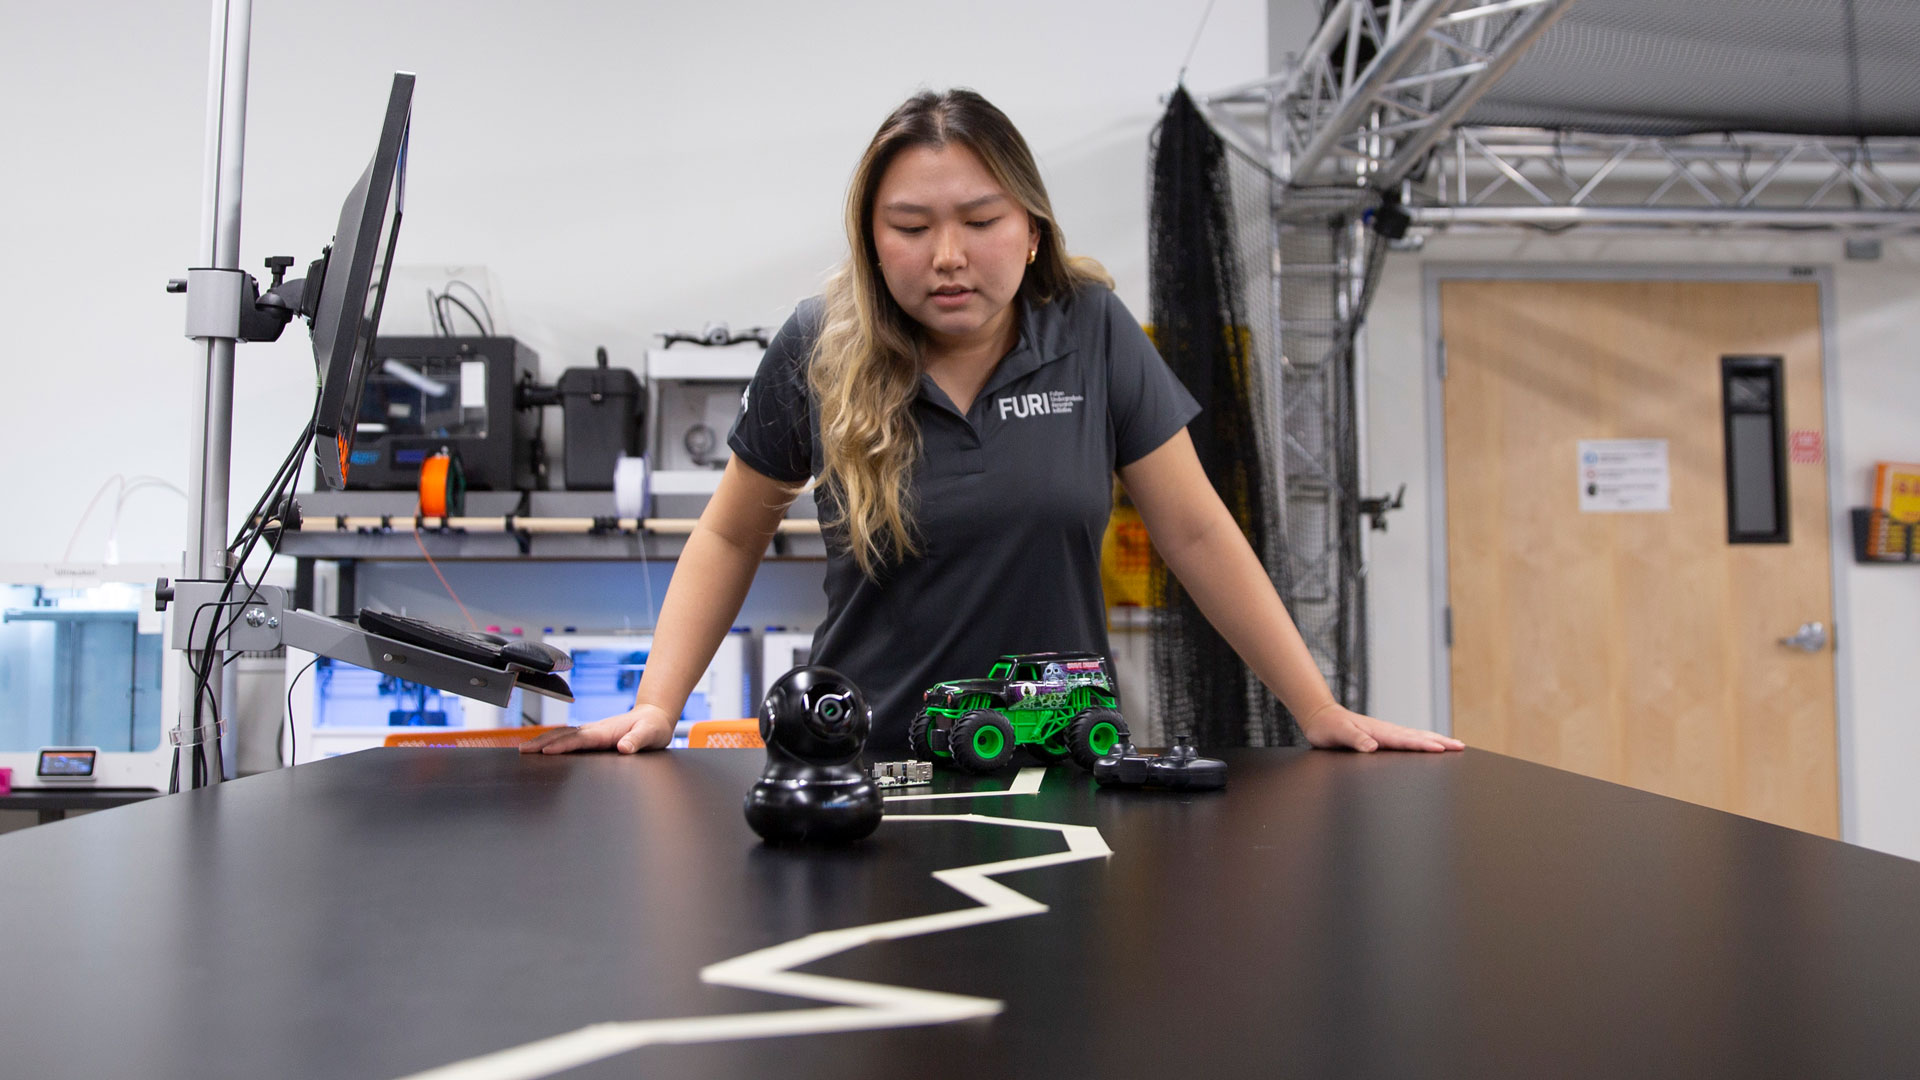 FURI student Jenna Jae Eun Lee works in a lab space with a remote control car and camera.